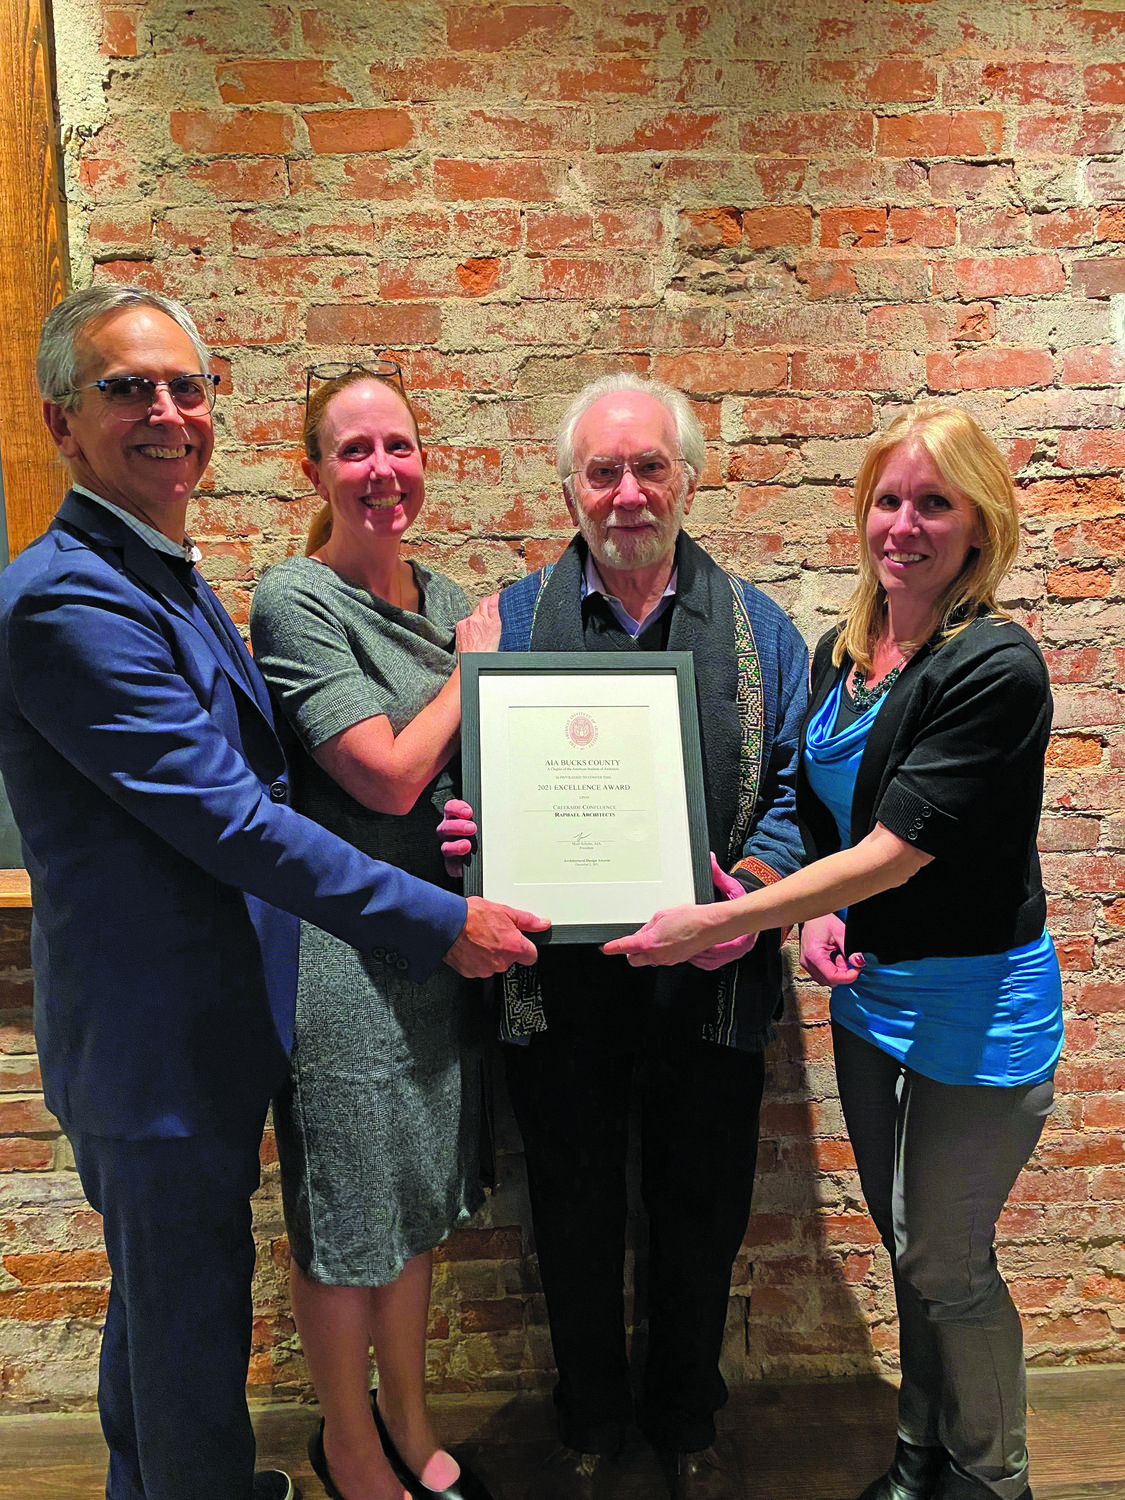 With the award are Michael Raphael, owner of Raphael Architects; Mairi Schuler, president of AIA Bucks County Chapter; Joel Levinson, juror; and Linda Szpak, Raphael Architects project manager.